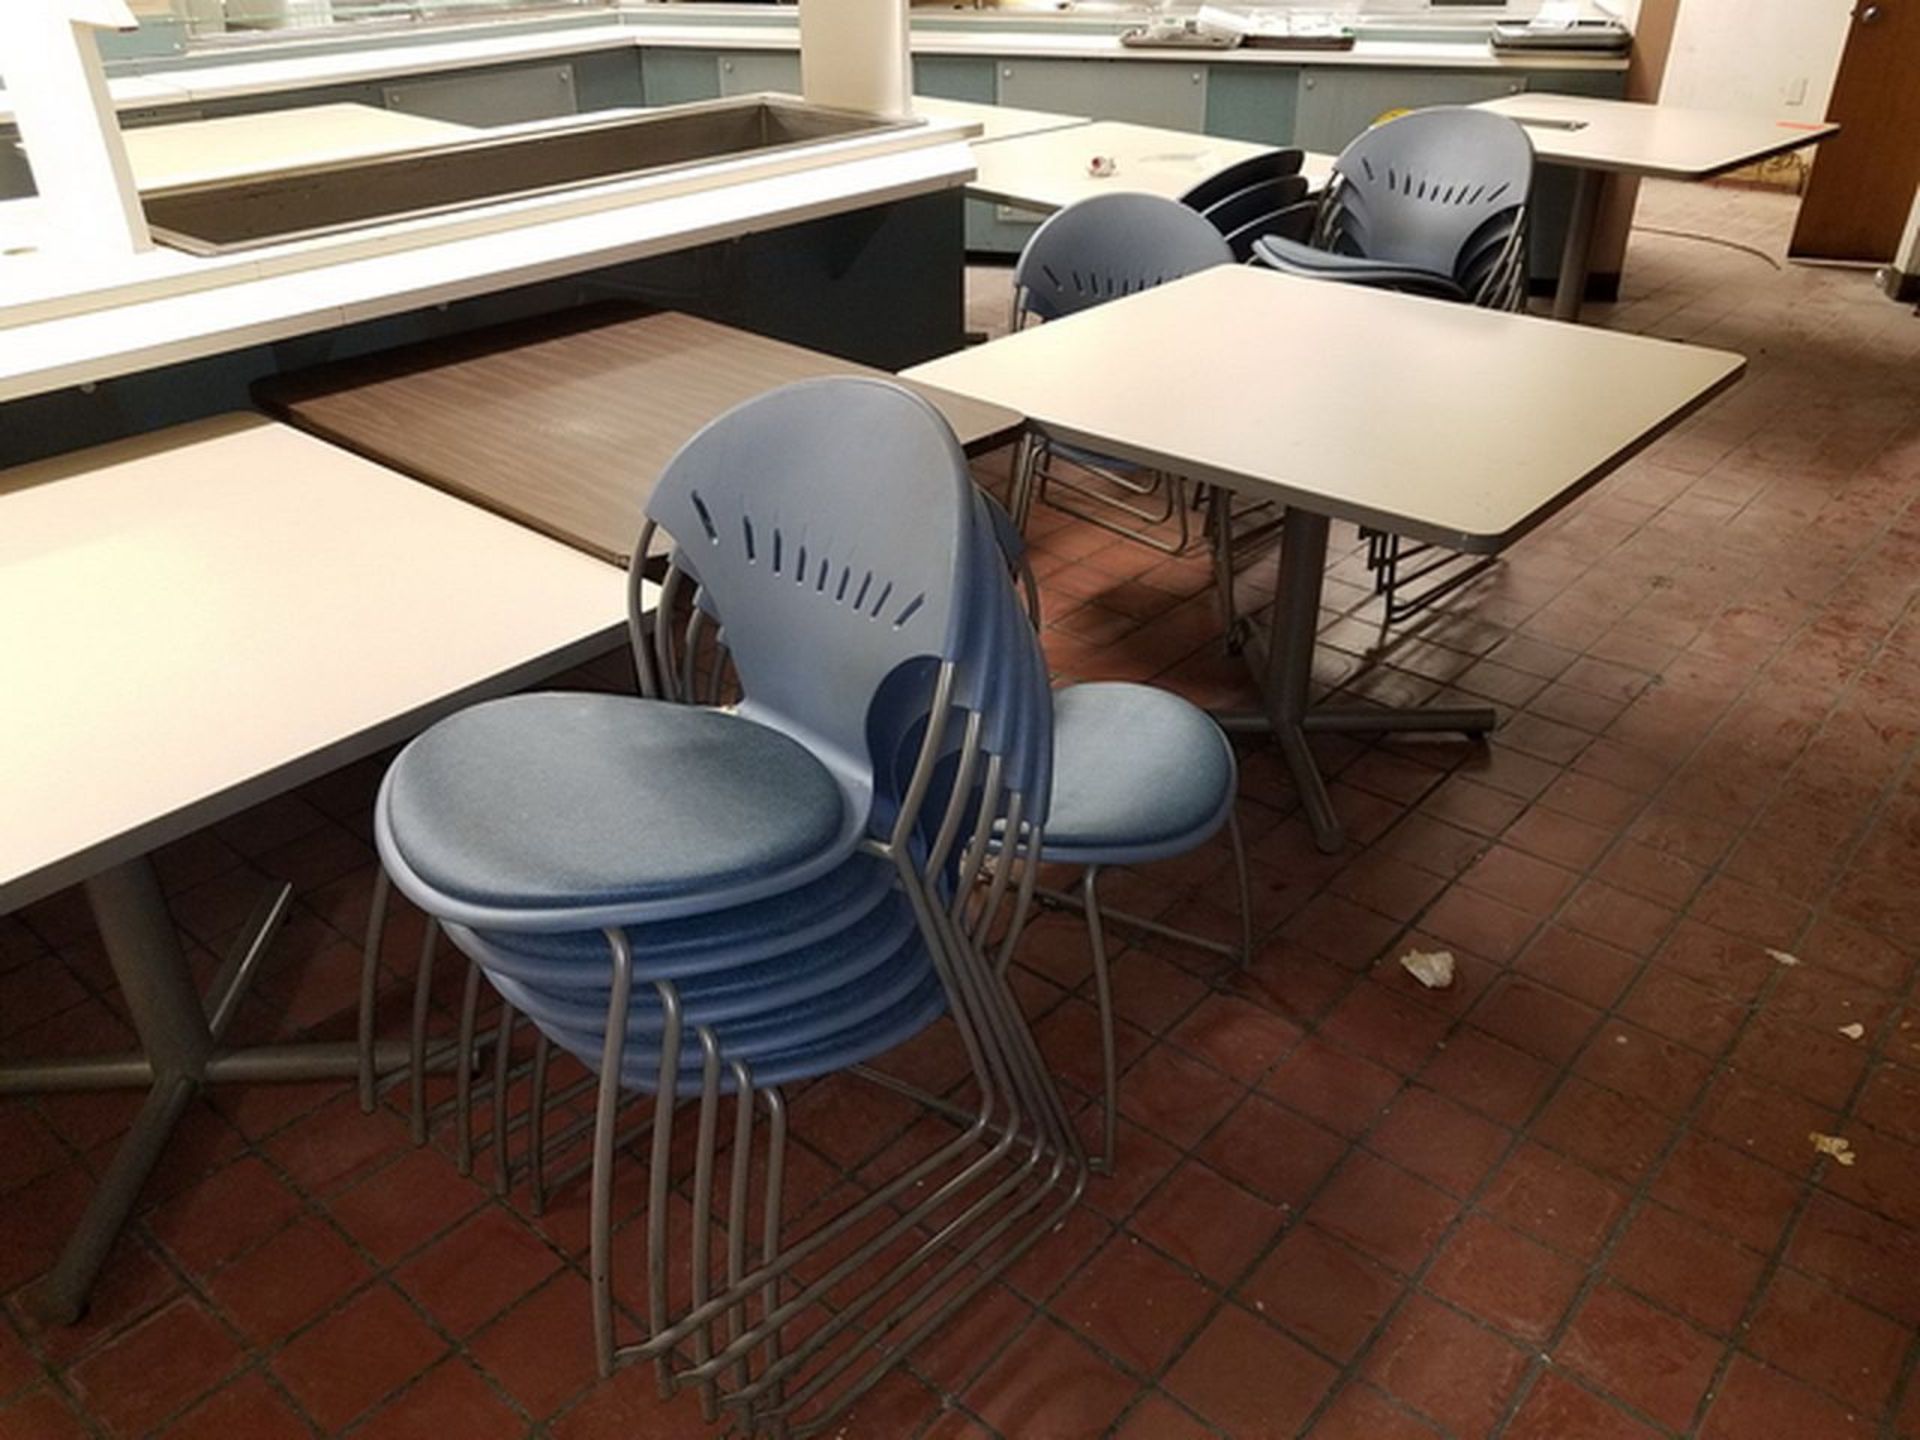 Lot of (17) Formica Top Cafeteria Tables, 42" x 42", includes 29 stacking chairs. Loc: Basement - Image 4 of 4